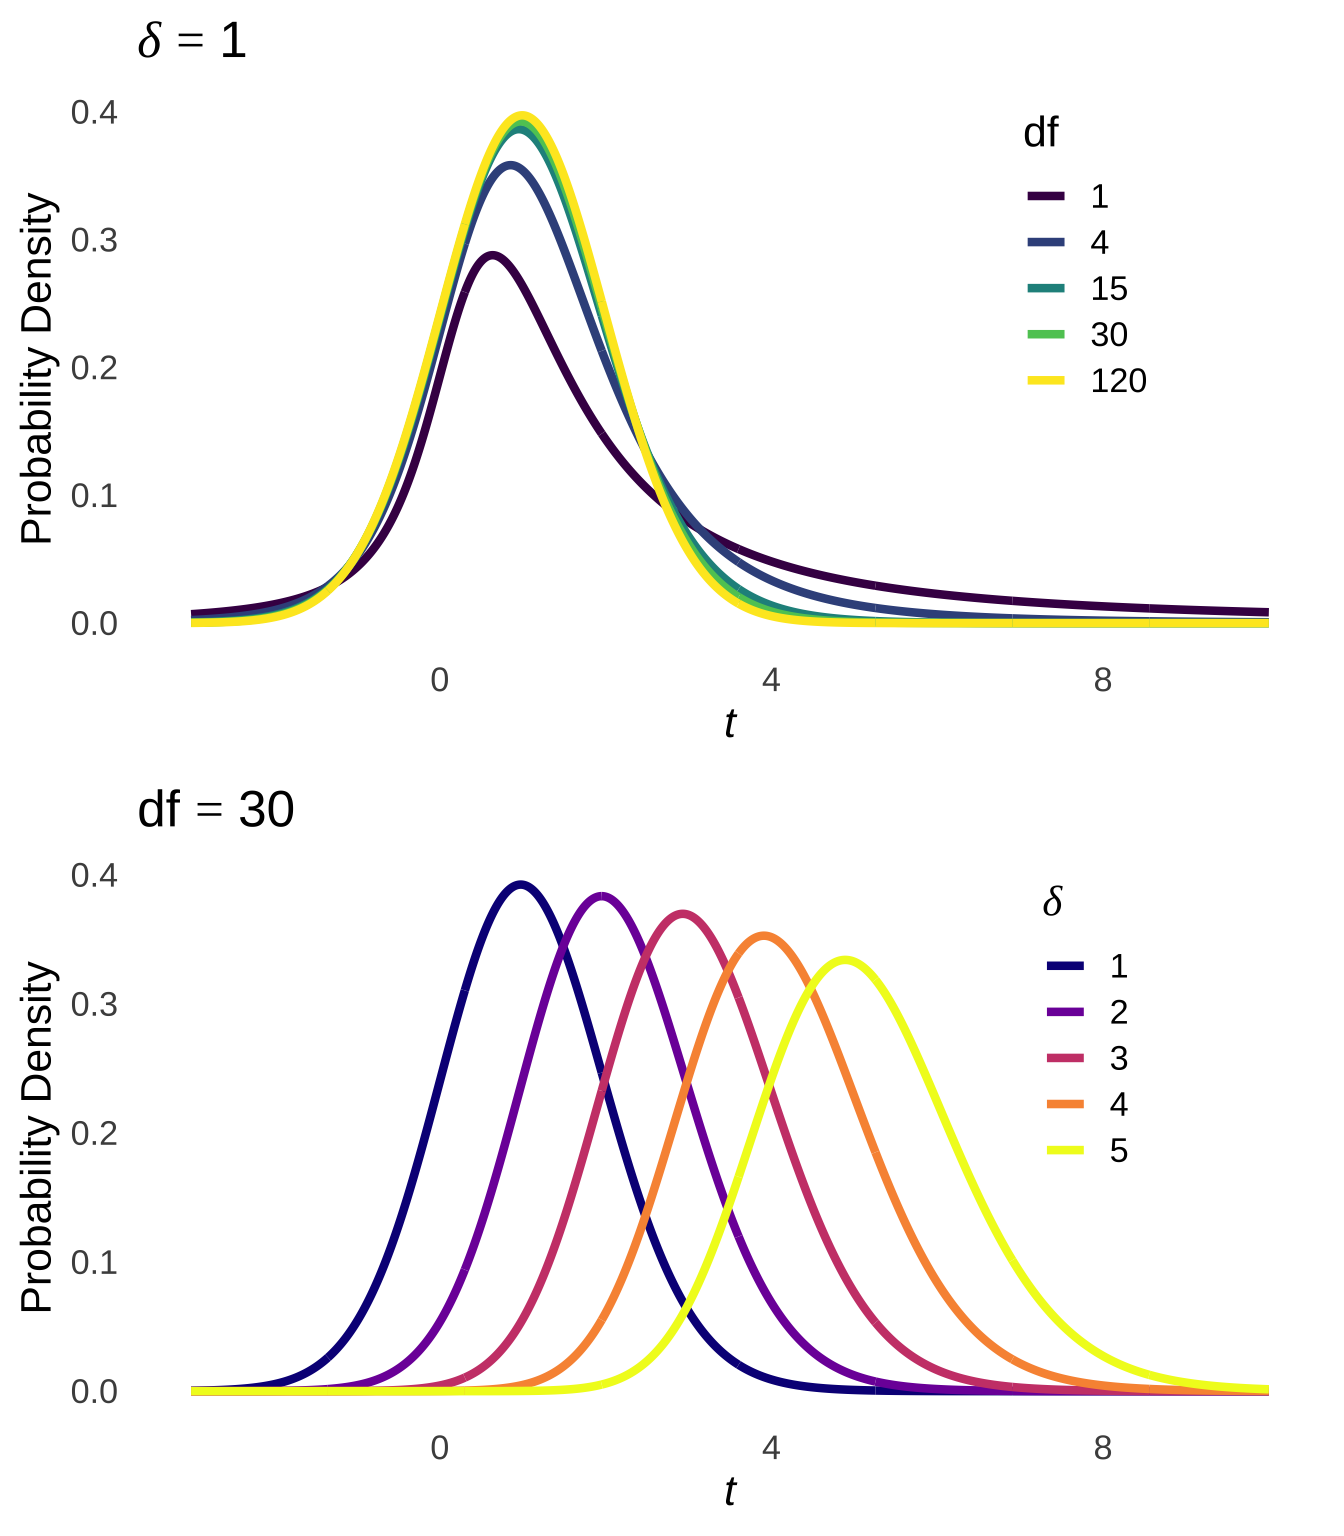 Noncentral $t$-distribution Curves with Constant $\delta$ and Varying $df$ (top) and with Constant $df$ and Varying $\delta$ (bottom)